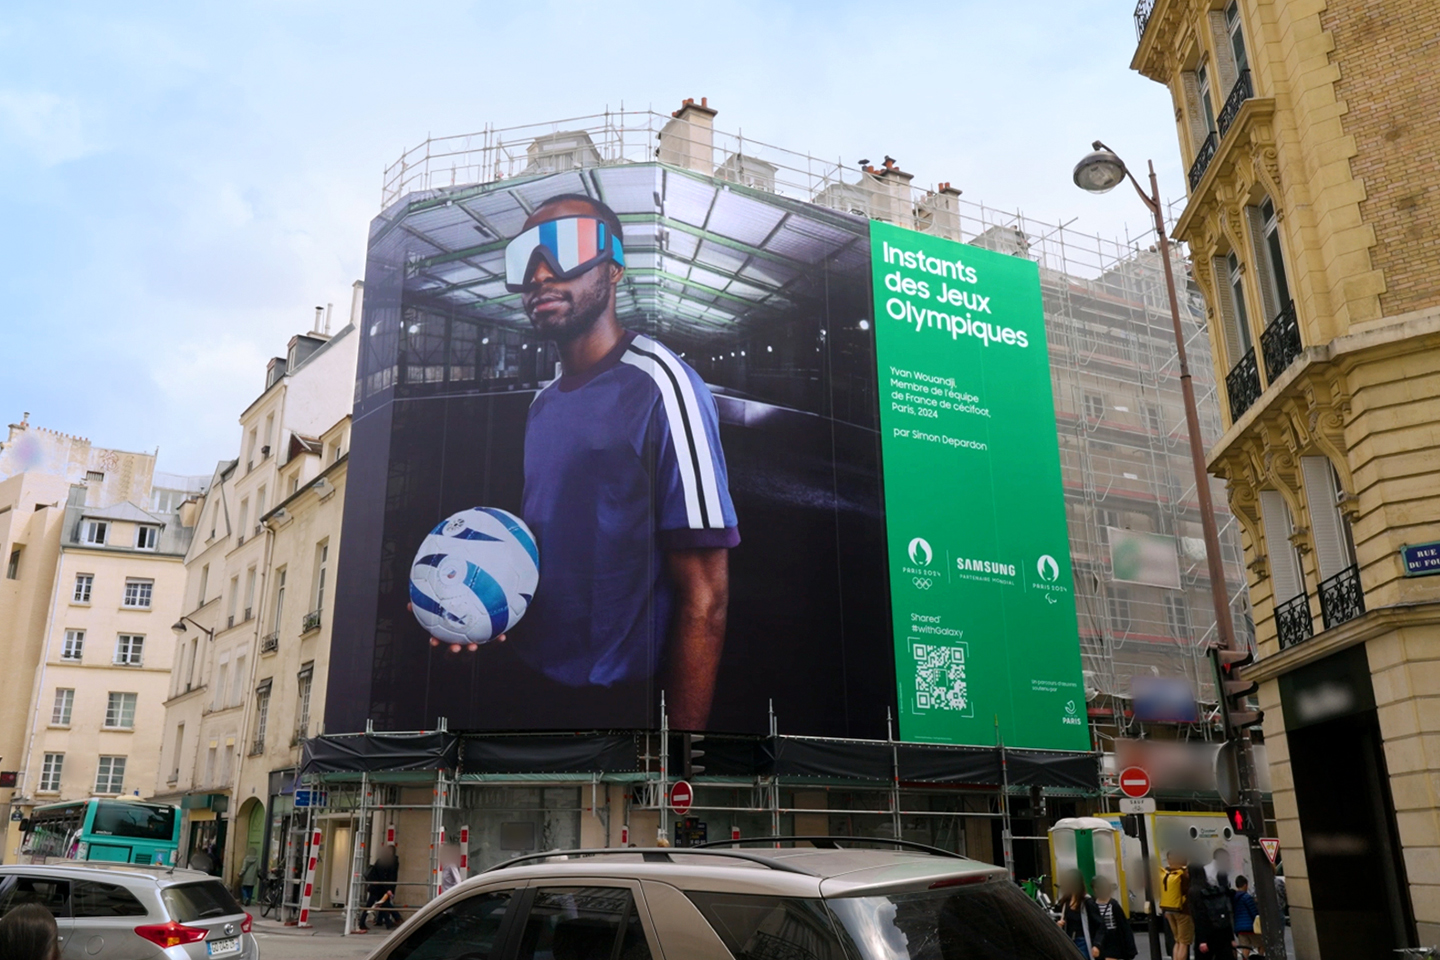 Olympic and Paralympic Games Paris 2024 With New Art Campaign in Saint-Germain